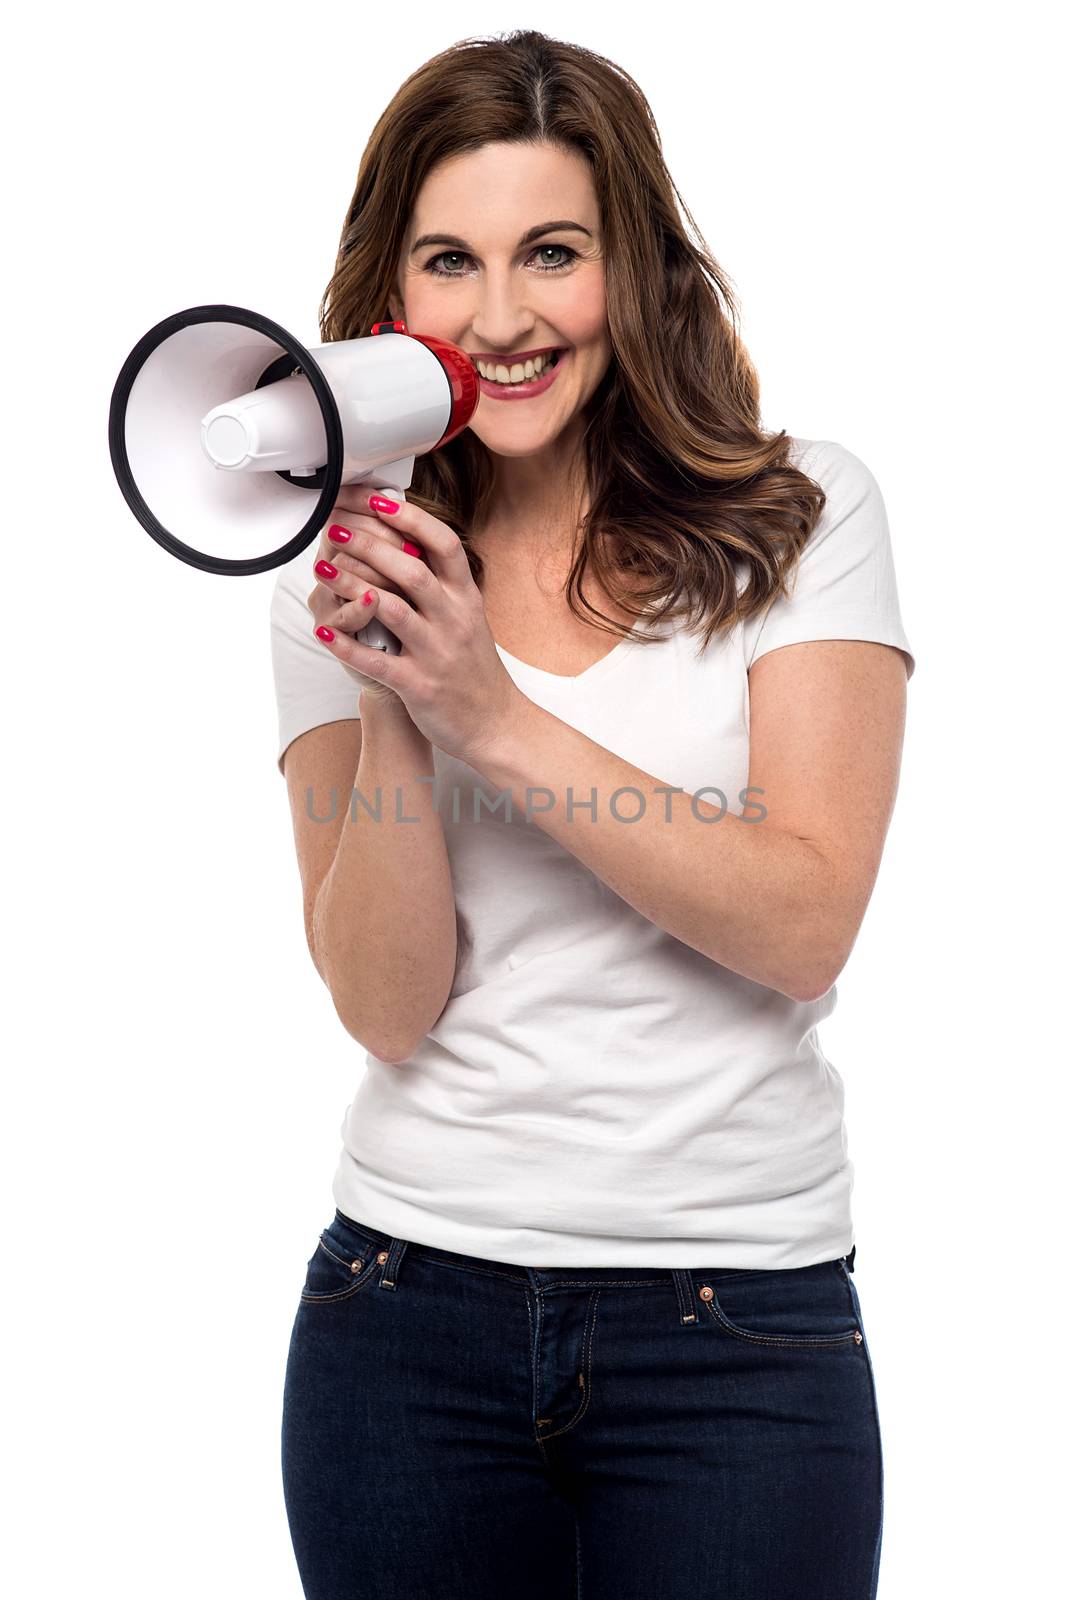 Smiling woman making advertise with megaphone